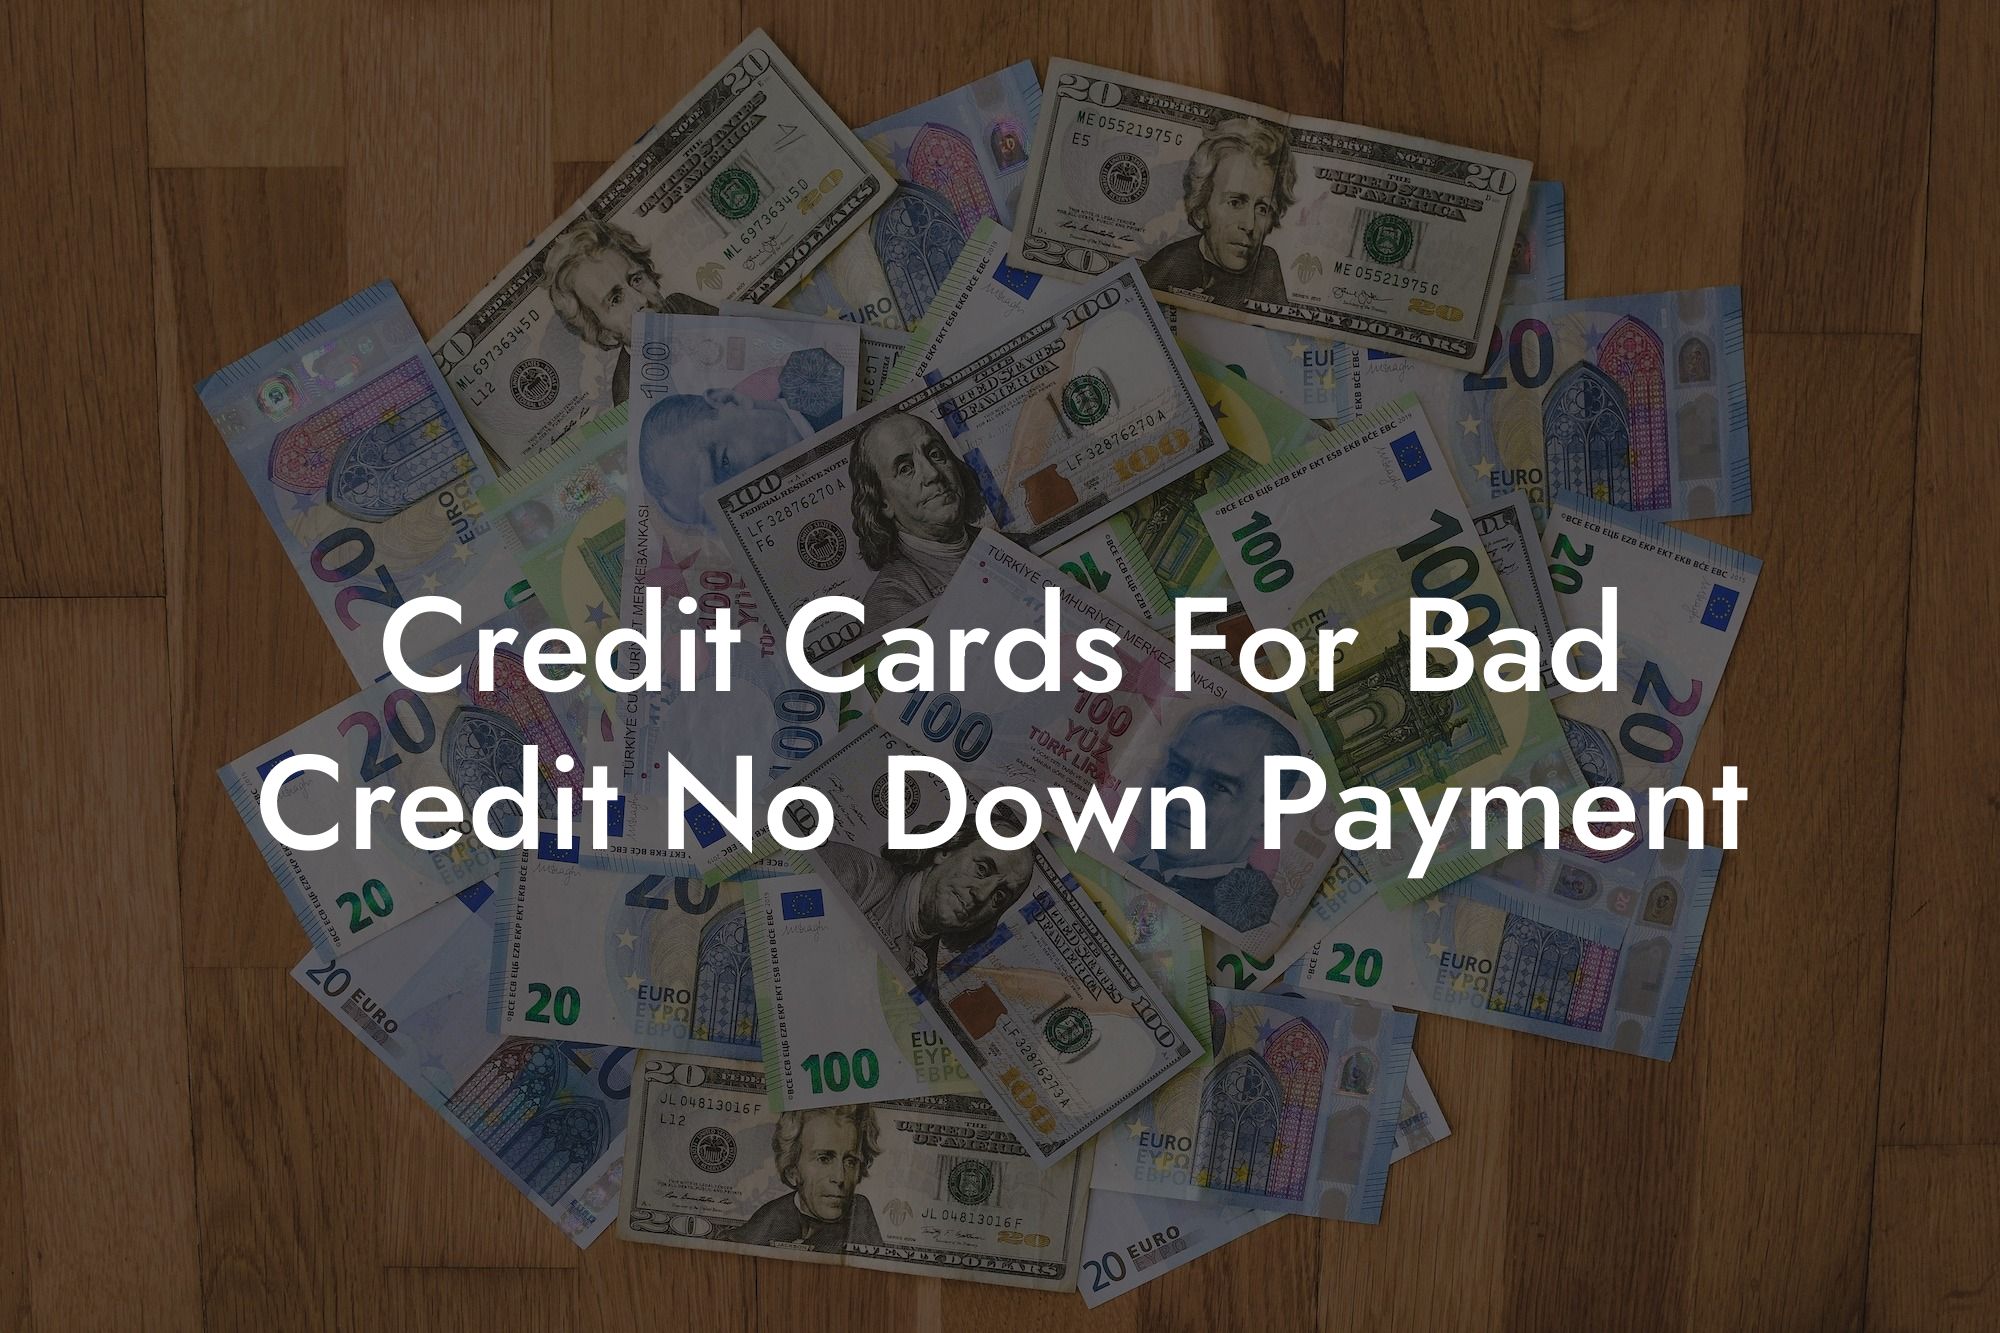 Credit Cards For Bad Credit No Down Payment